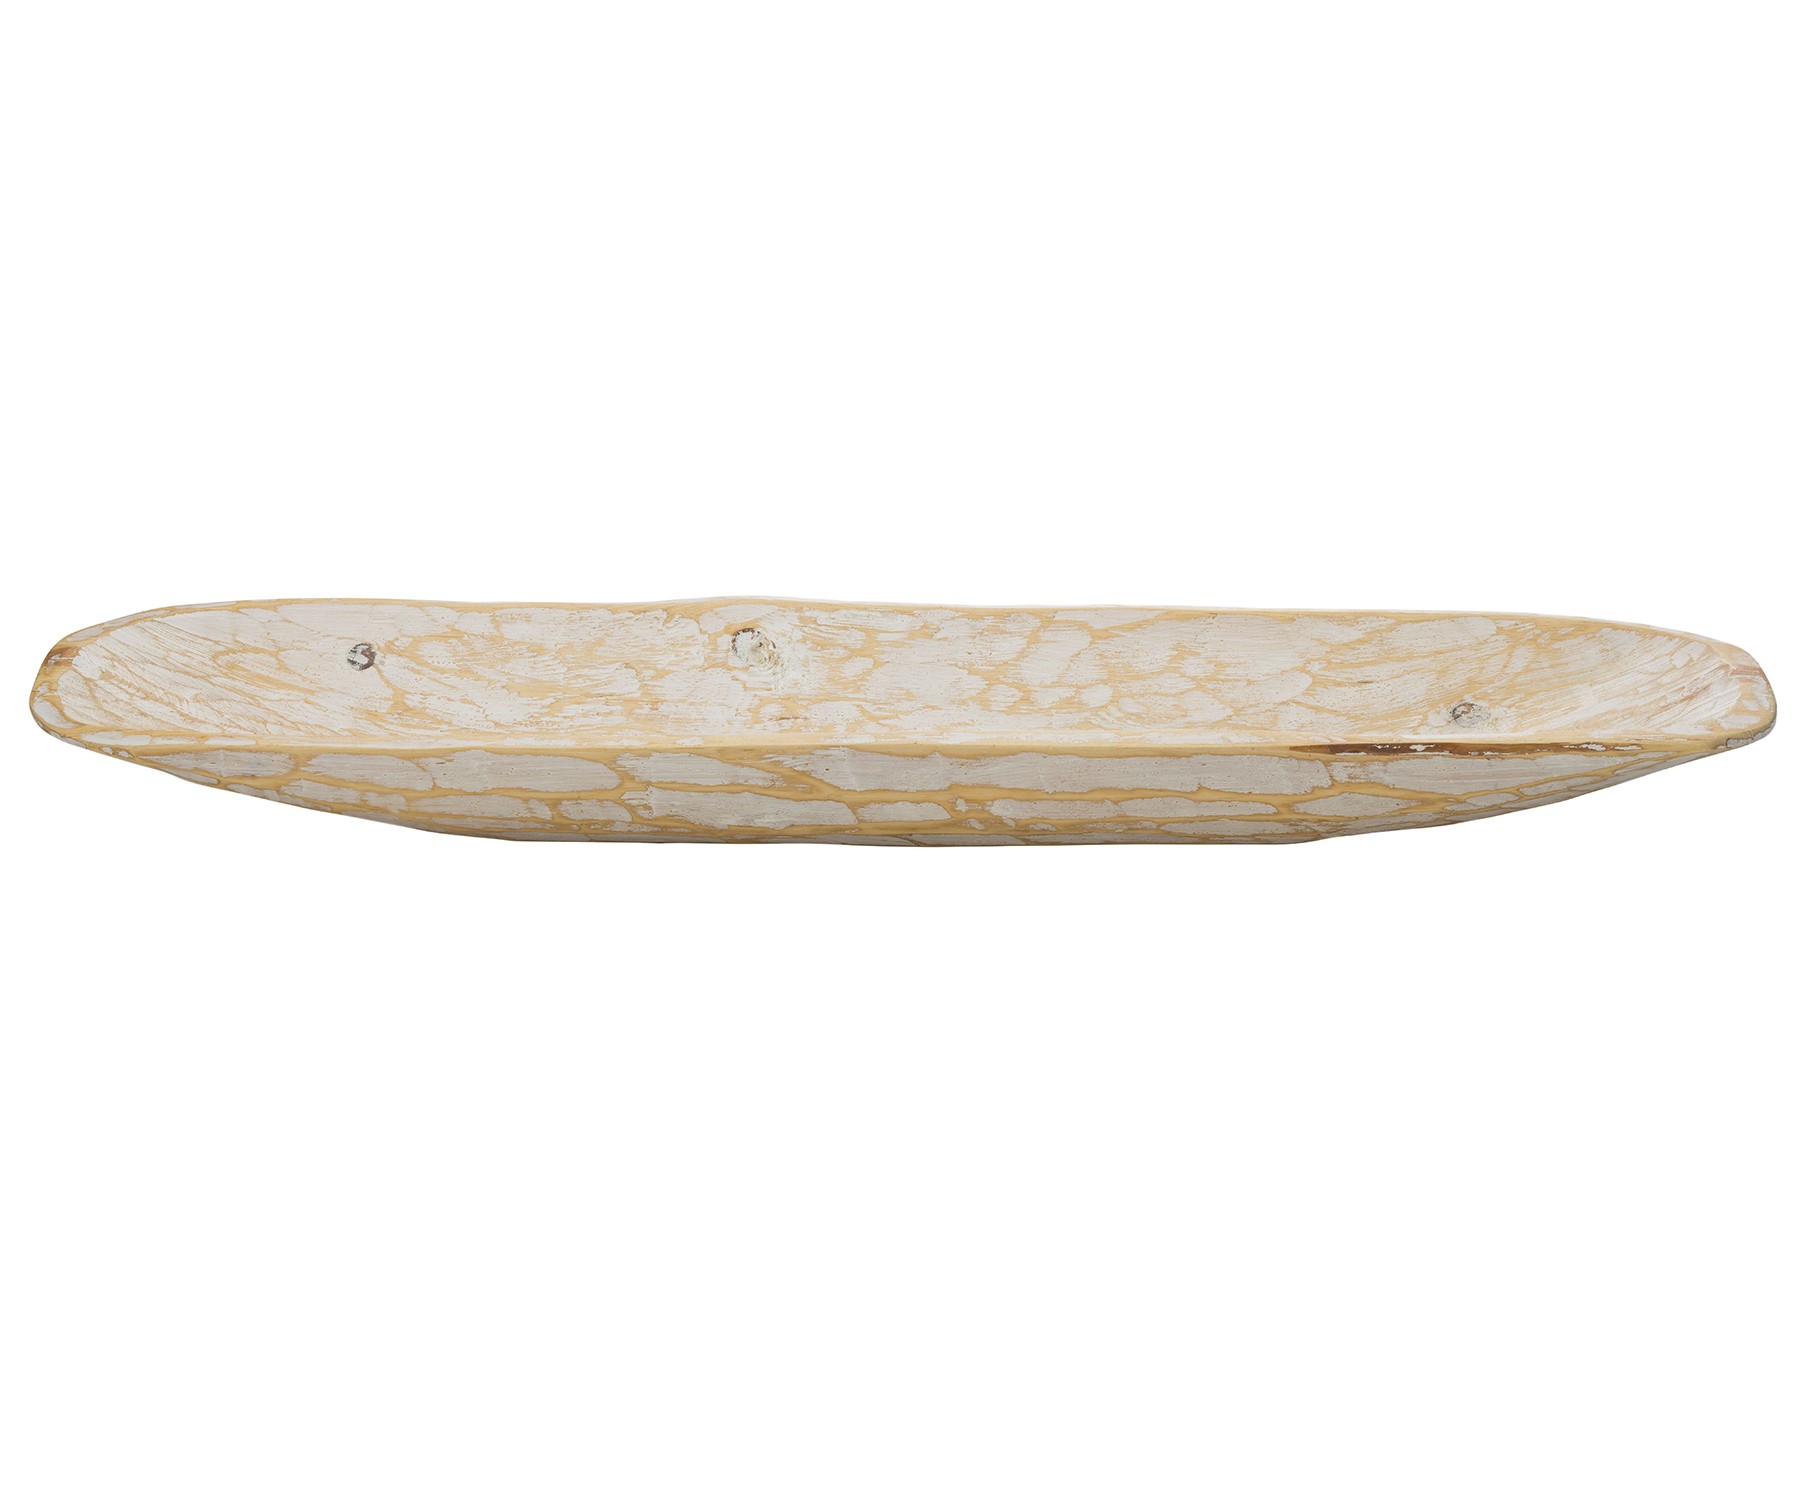 Rustic White and Natural Handcarved Wide Oval Centerpiece Bowl